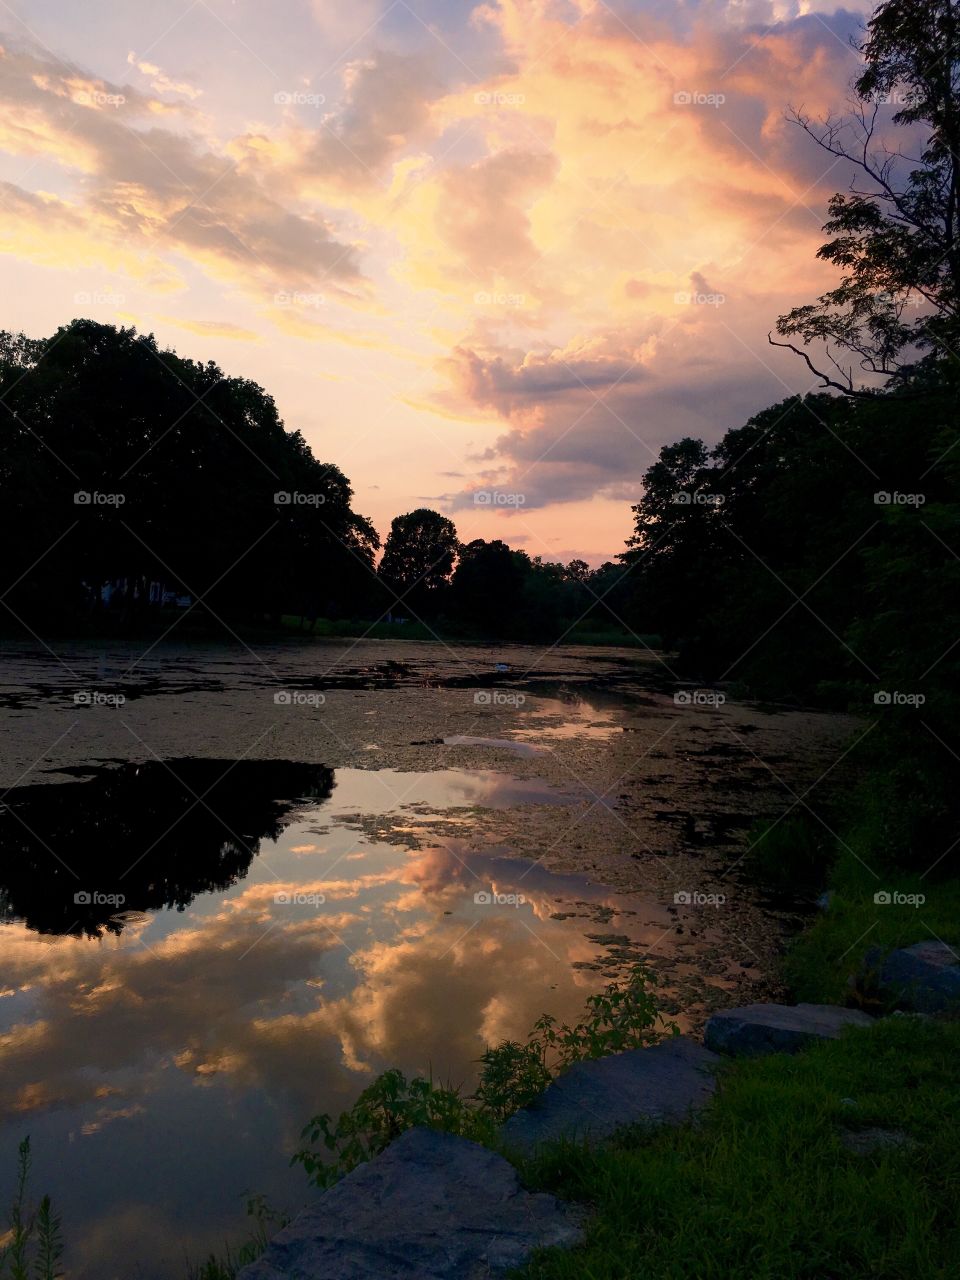 Butterfly Pond in Lincoln, RI - peaceful nature scene consisting placid water reflecting the clouds and sky at sunset surrounded by silhouetted trees.